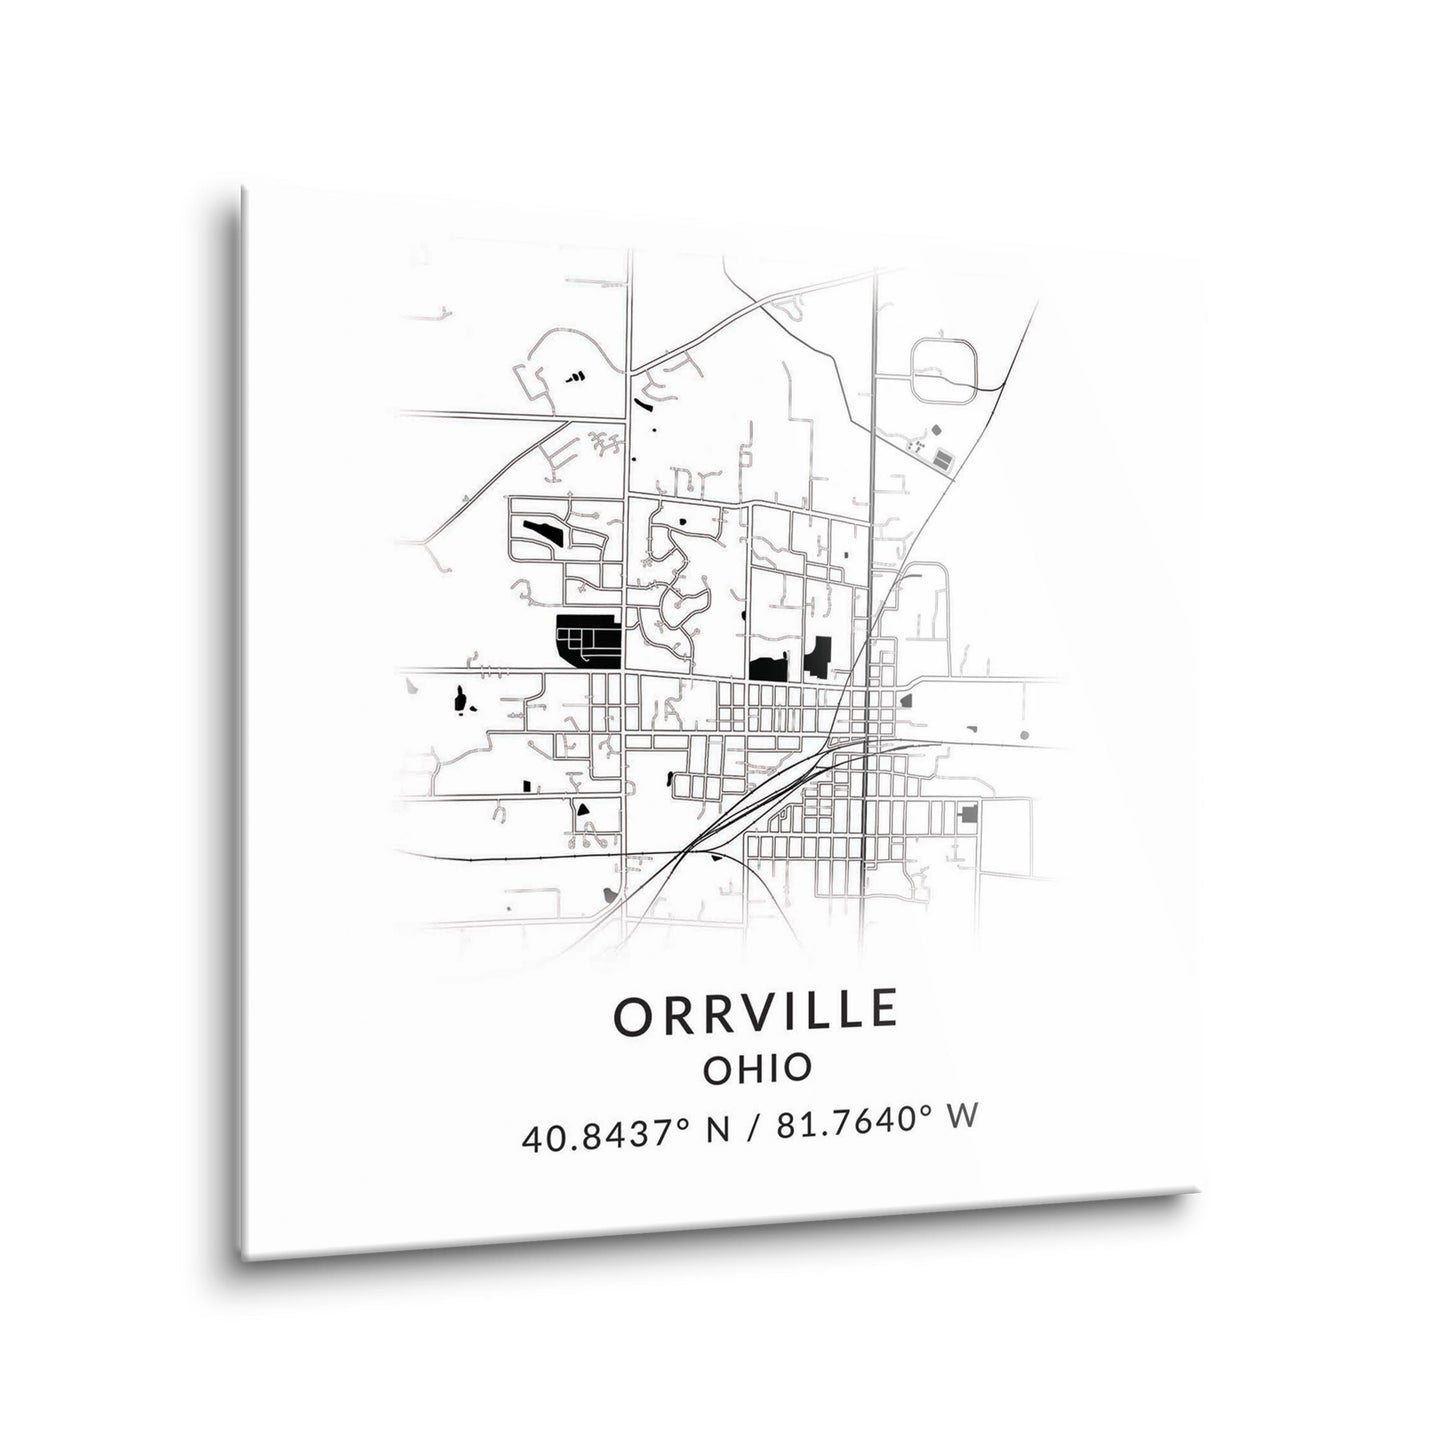 Orrville Oh Minimalistic Map With Coordinates | Hi-Def Glass Art | Eaches | Min 2